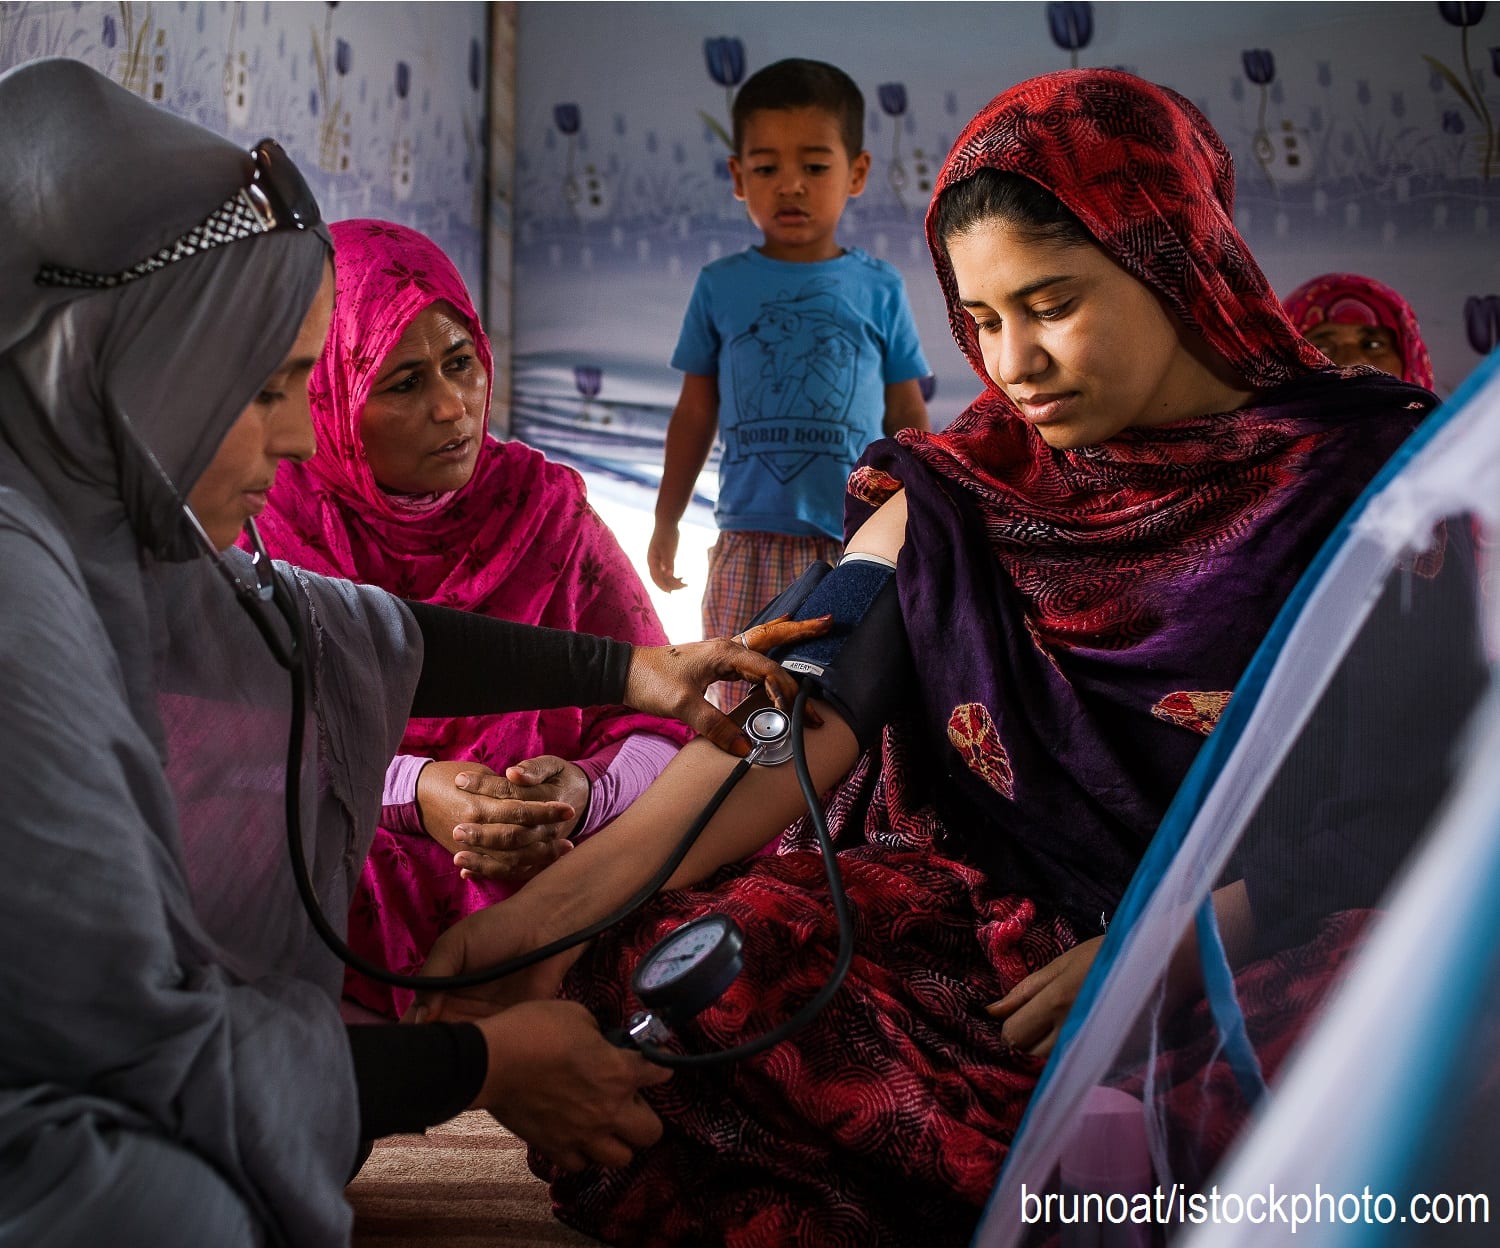 An Algerian woman measures the blood pressure of a woman who has recently given birth.